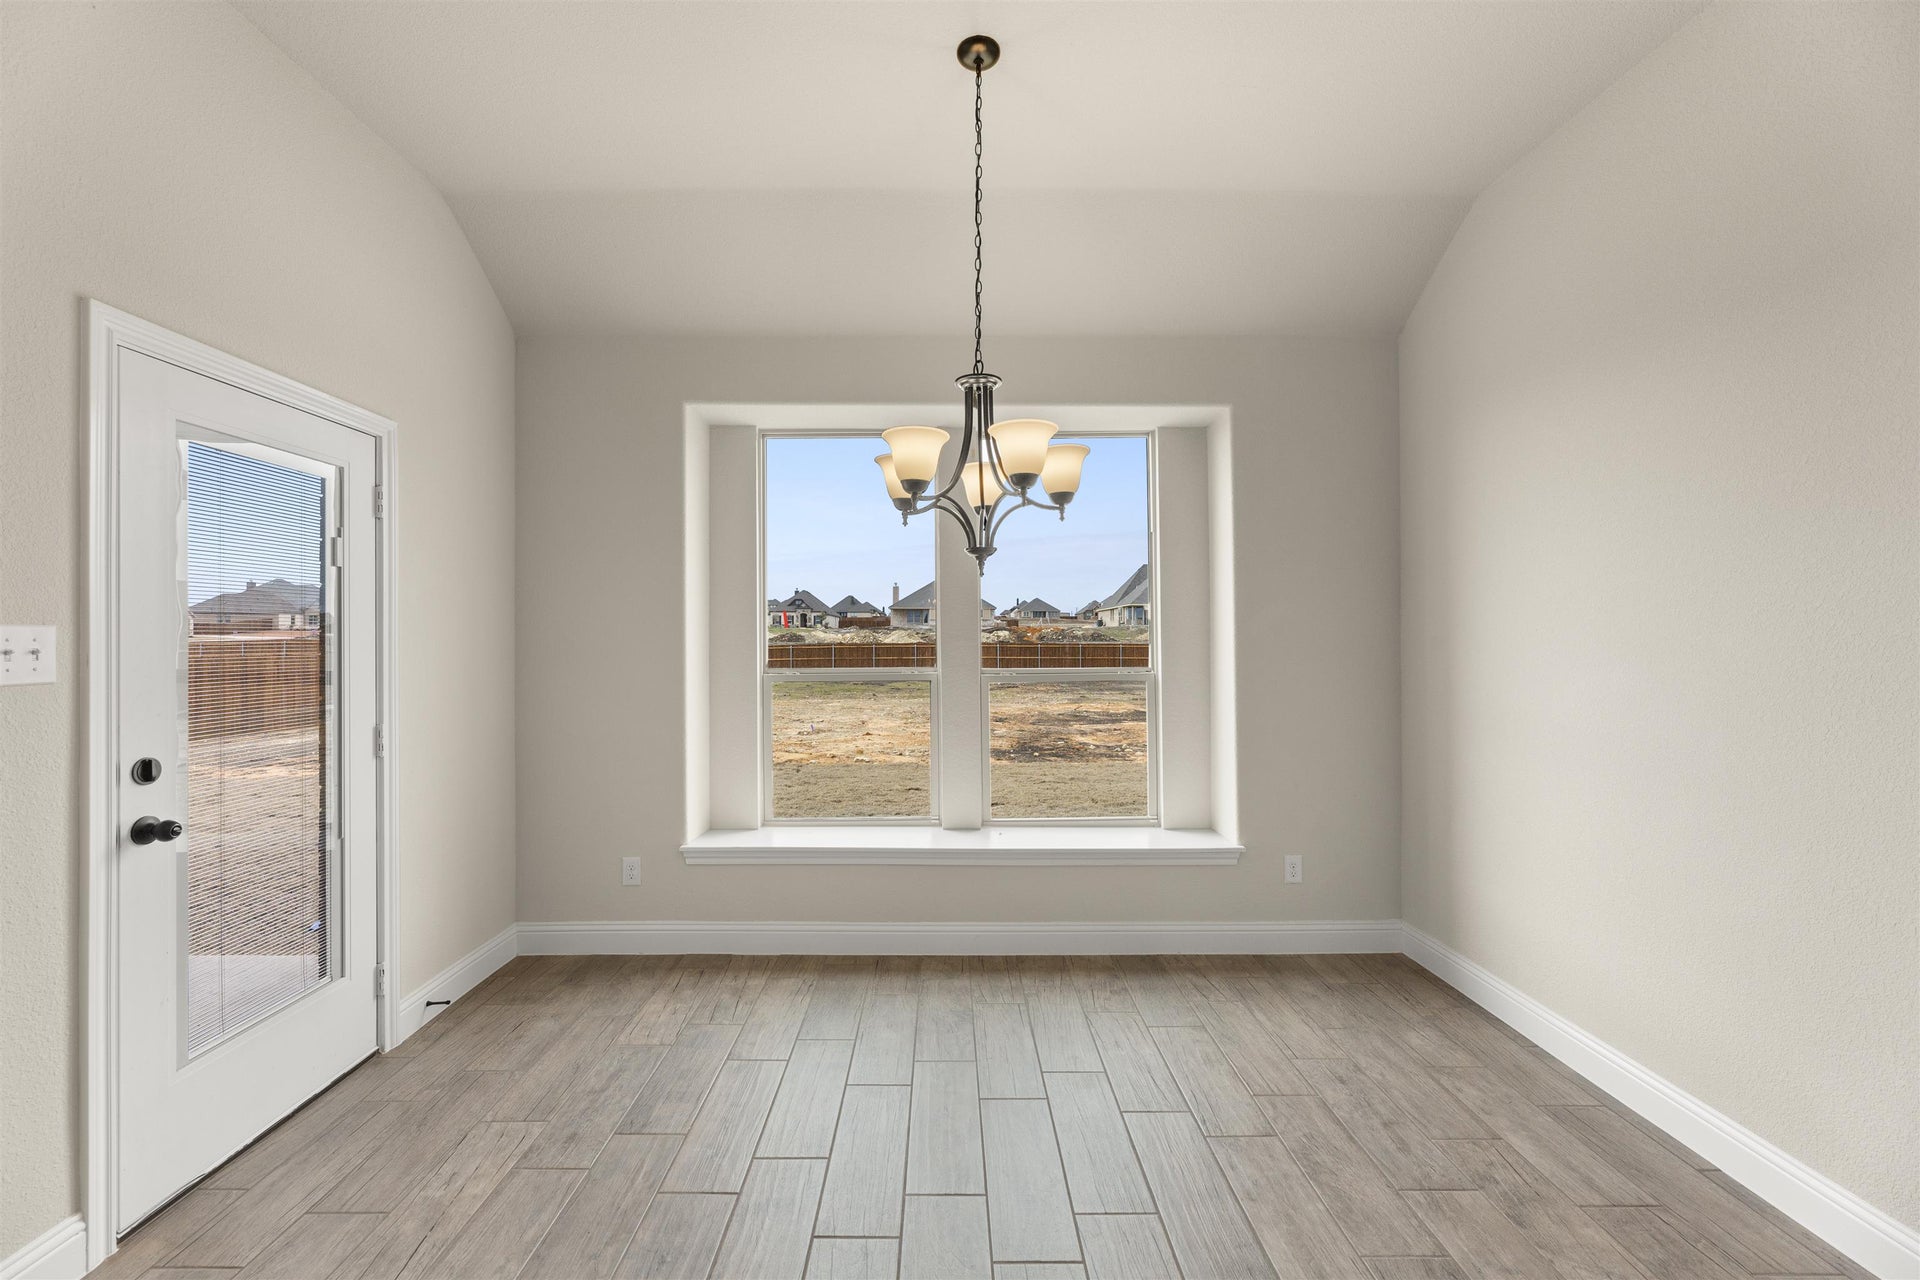 2,435sf New Home in Godley, TX